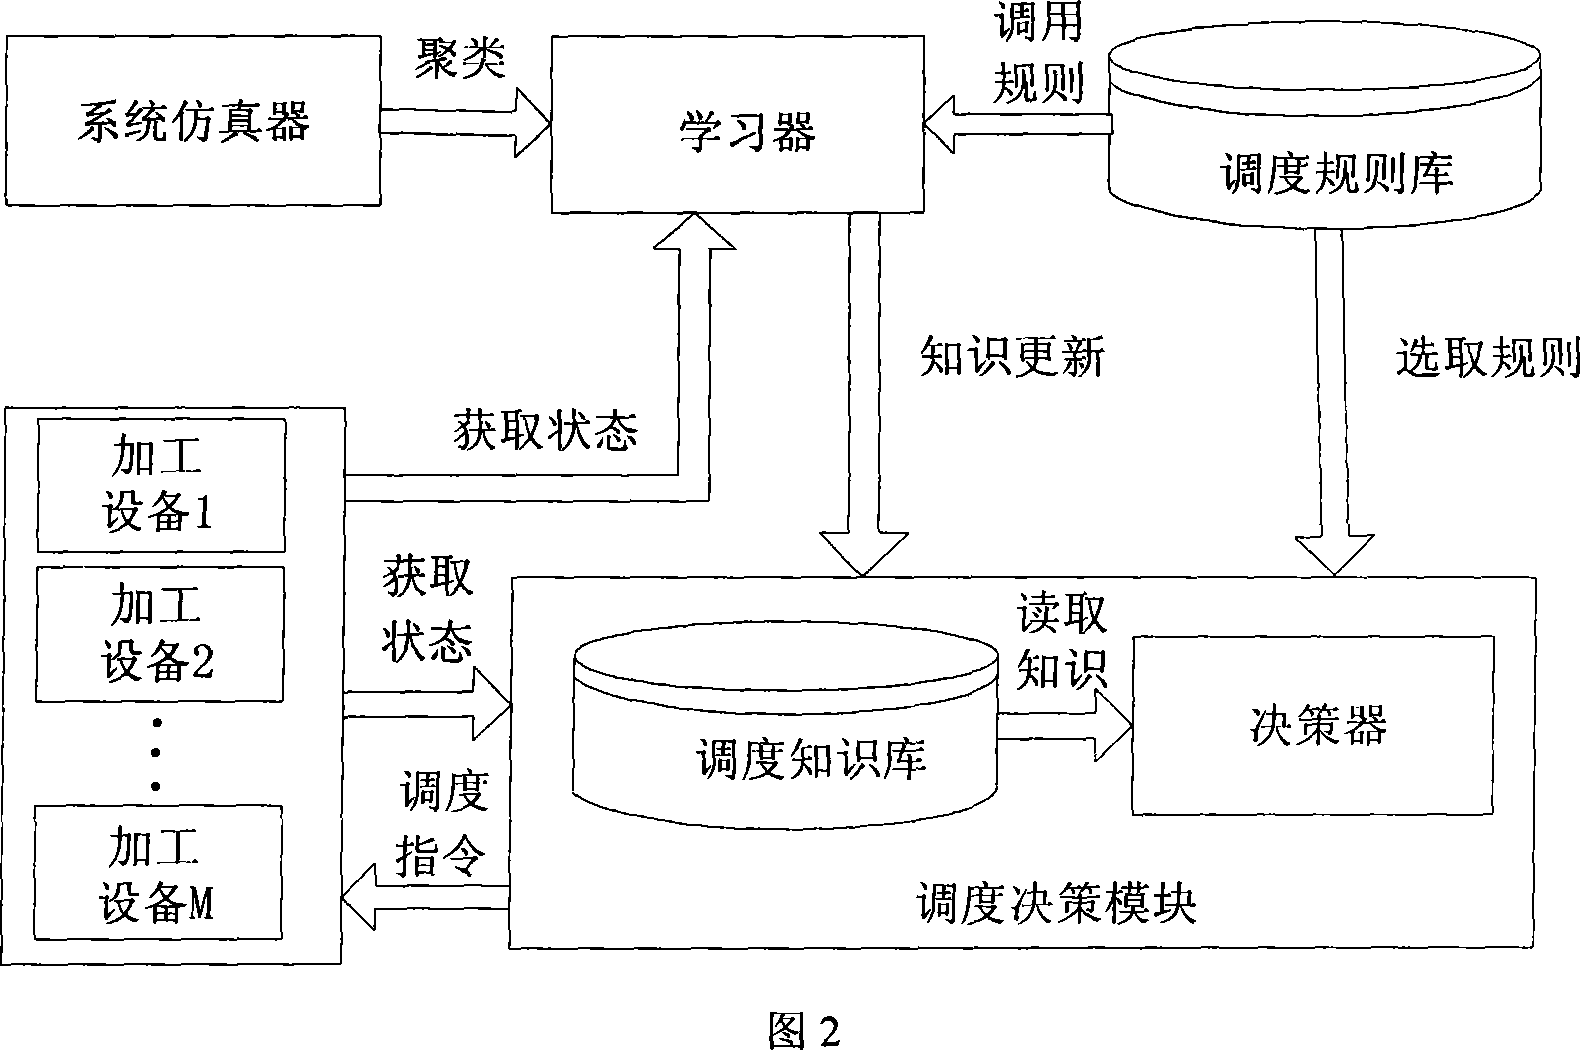 Self-adapting selection dynamic production scheduling control system accomplished through computer